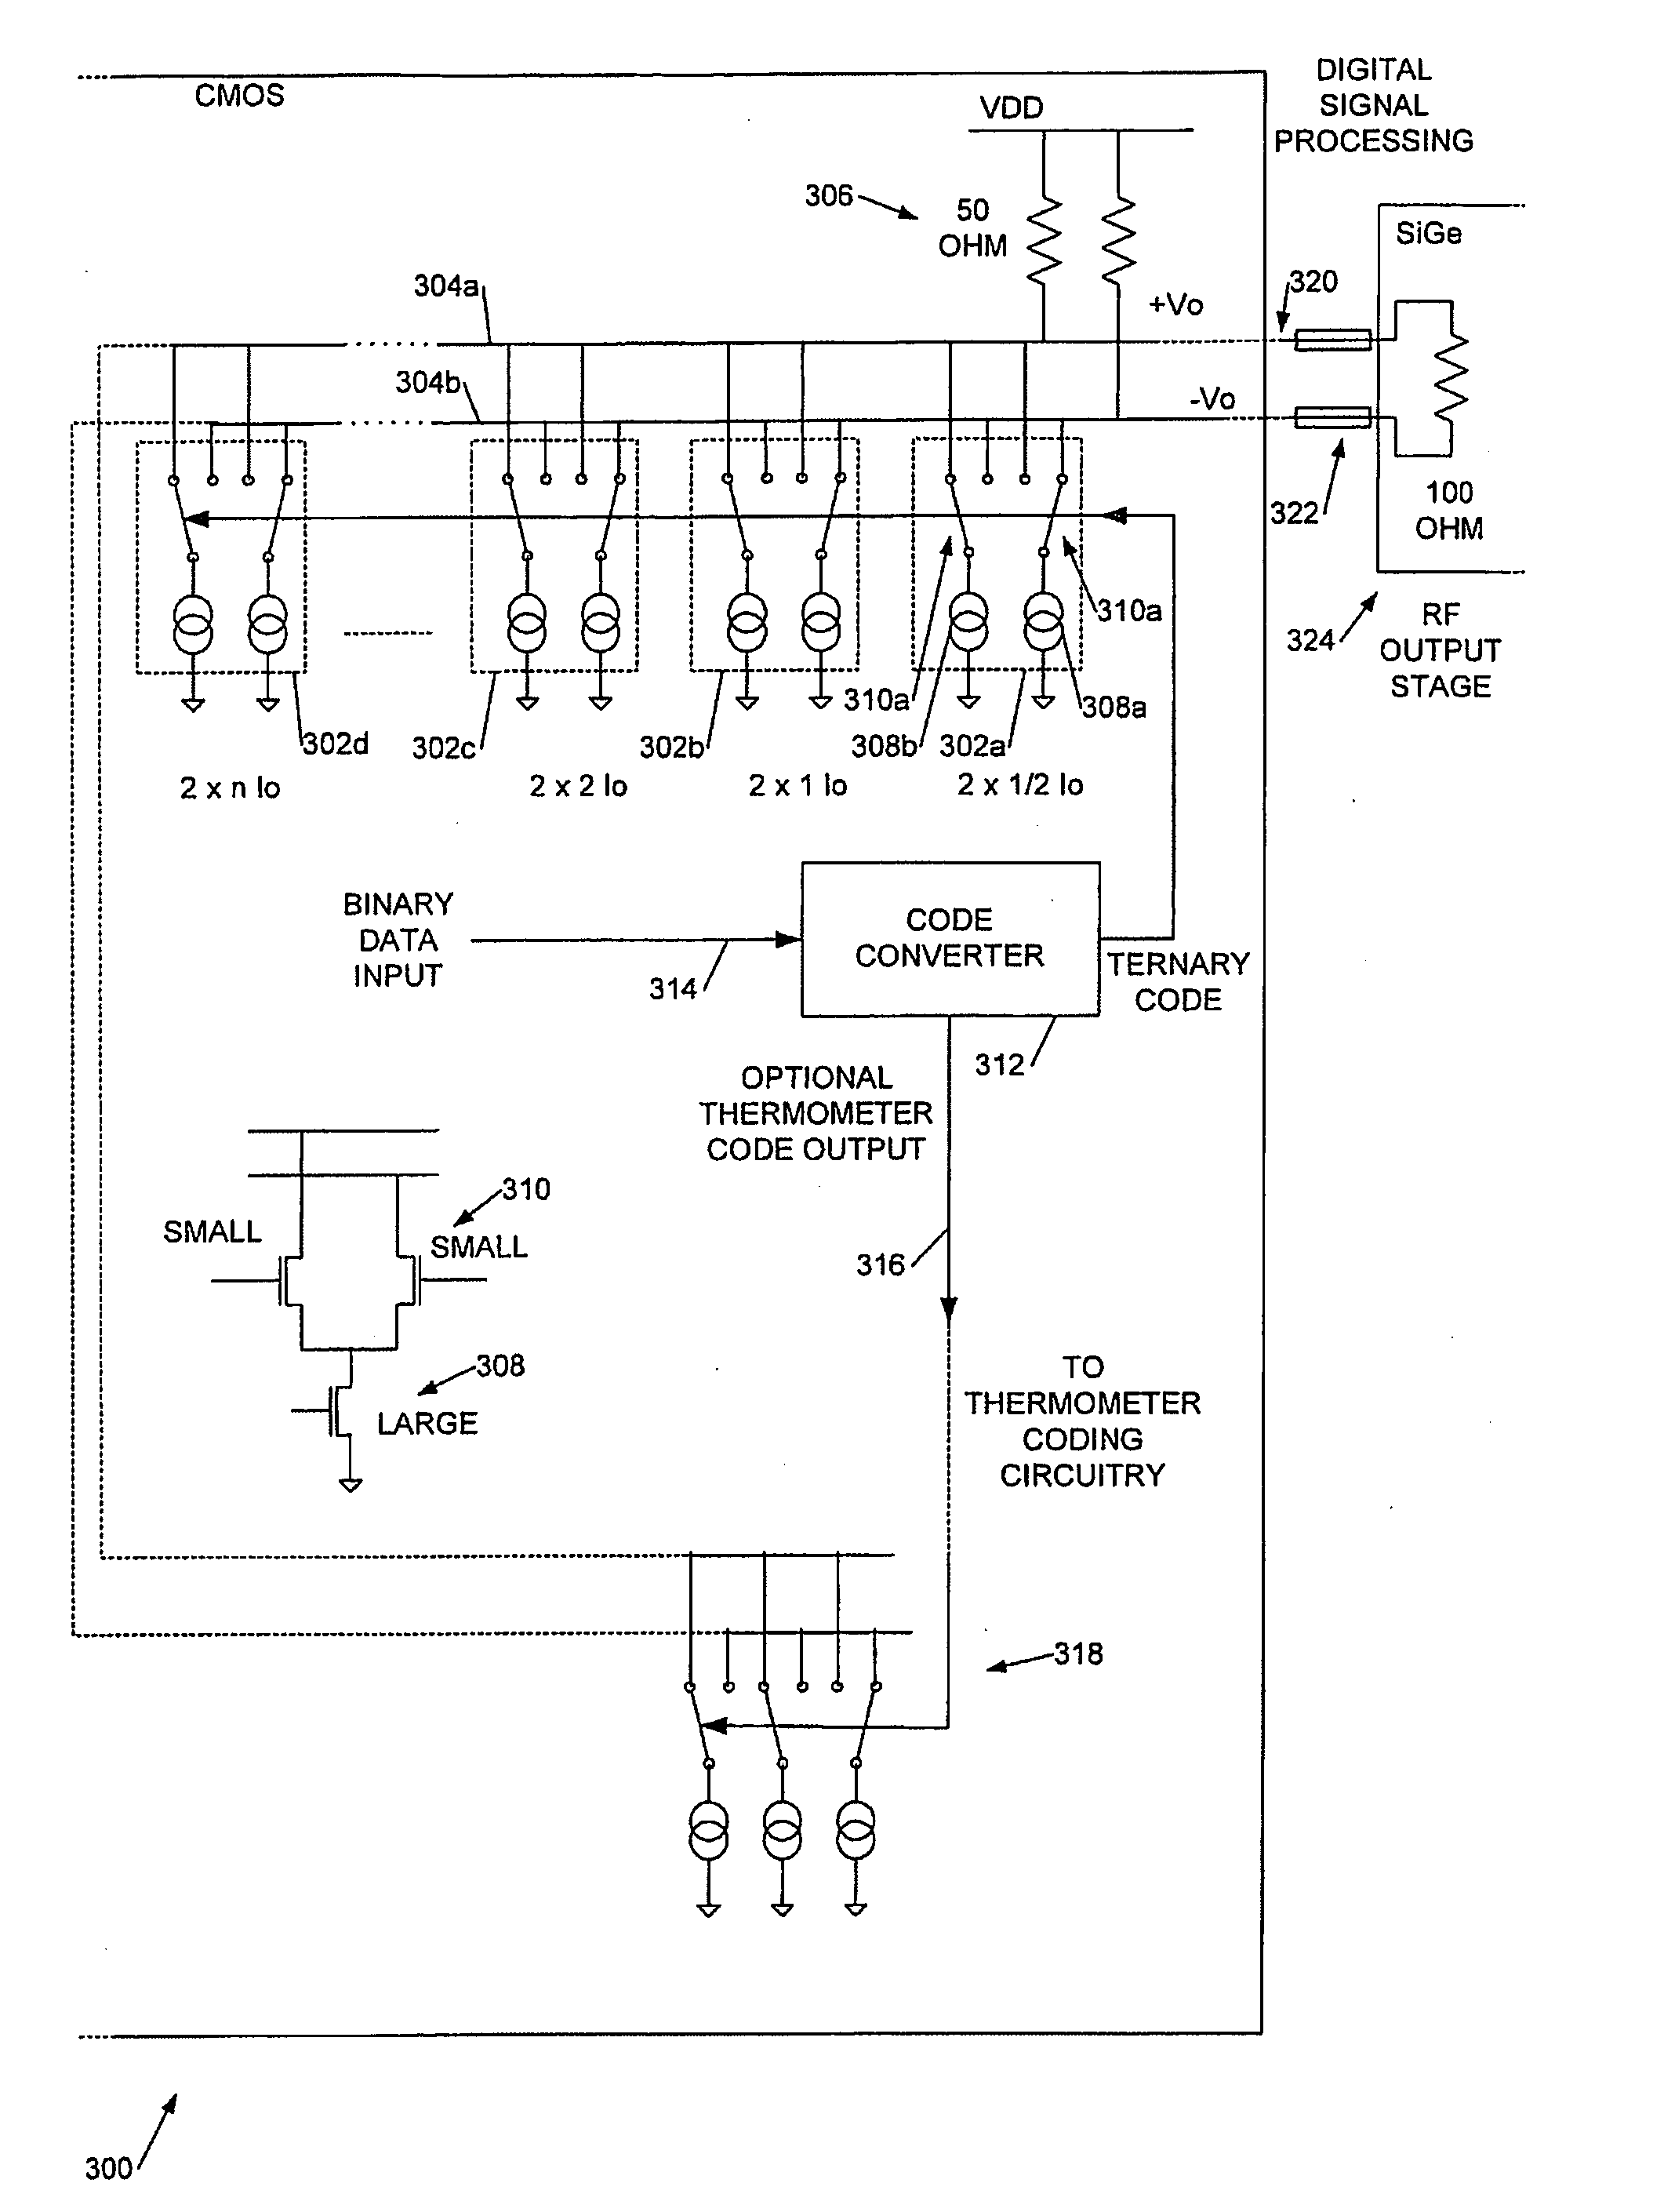 Digital-to-analogue converters